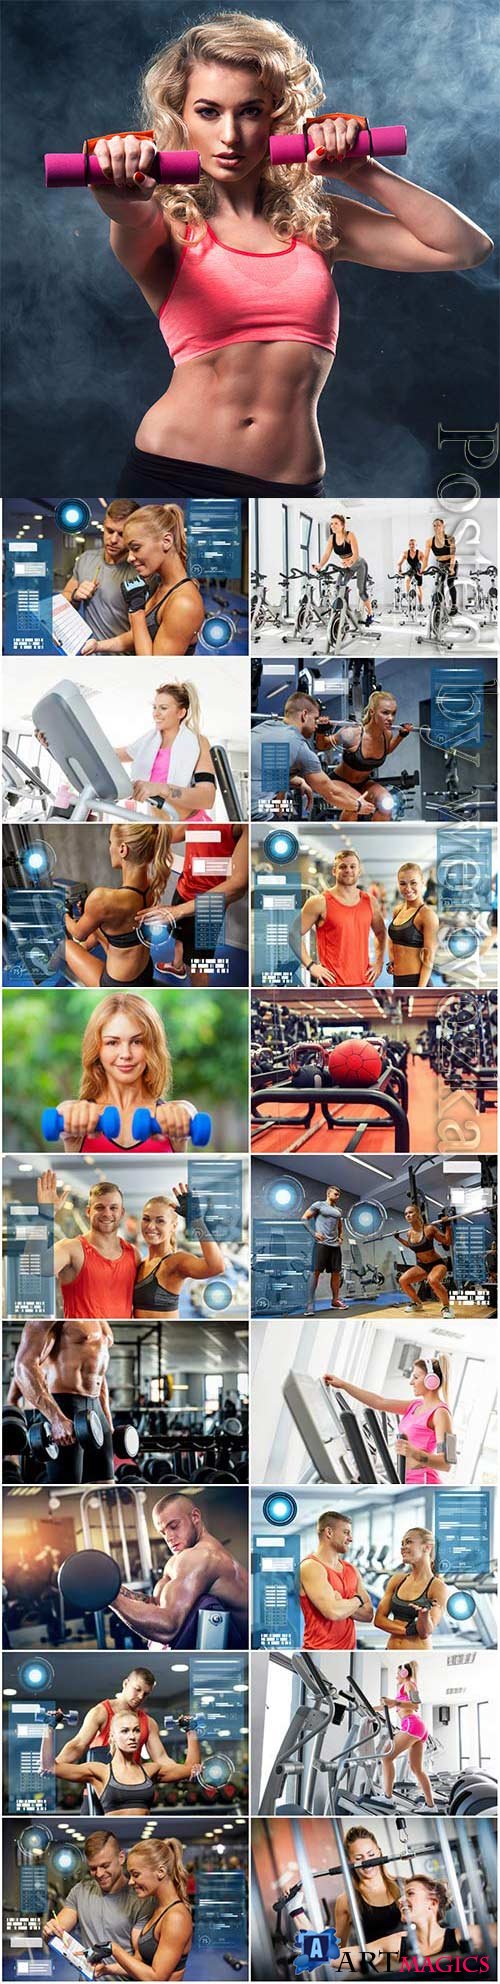 People and sport concept stock photo